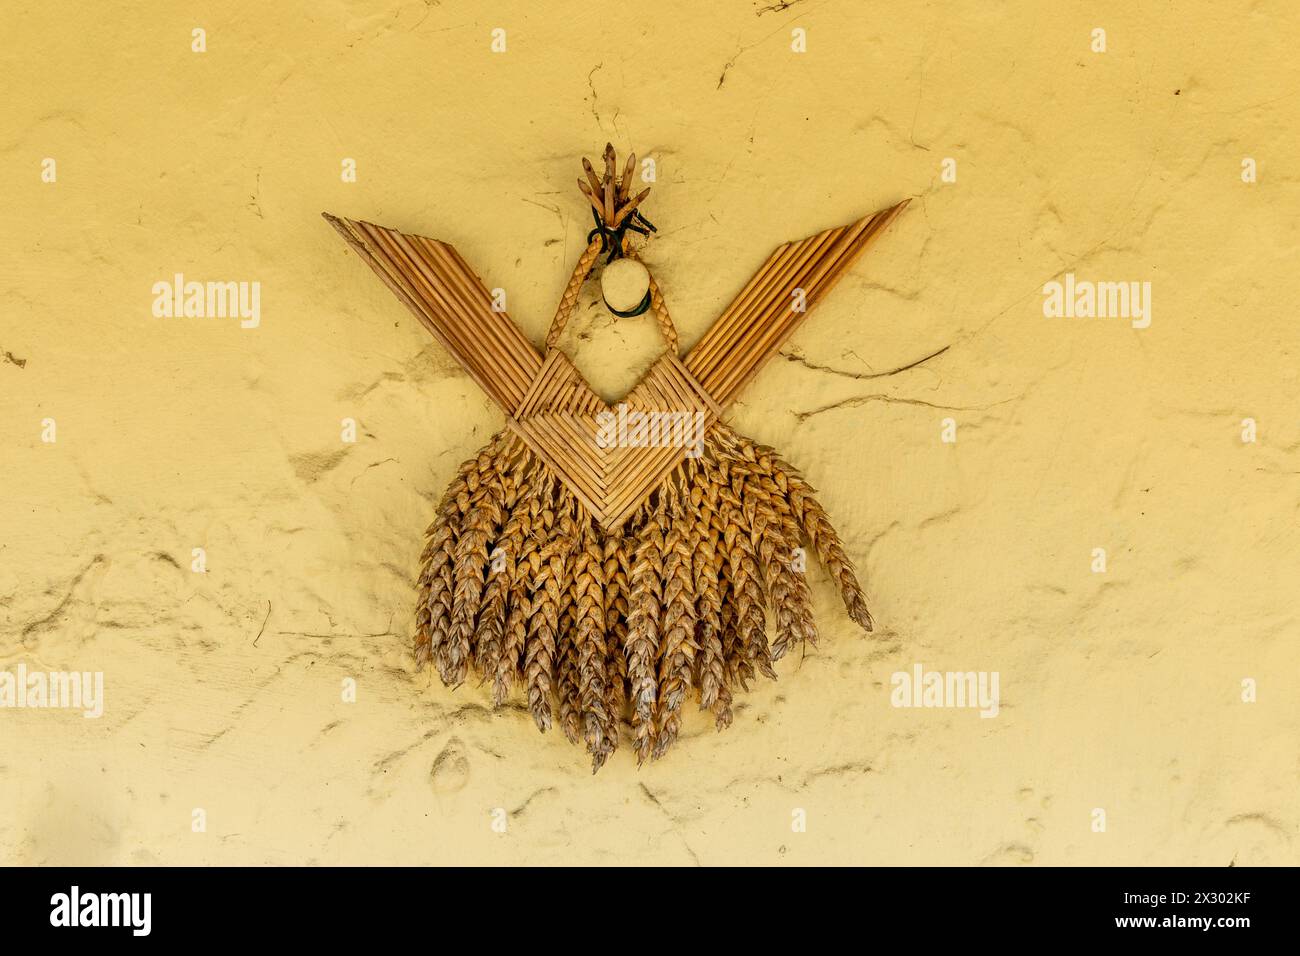 Traditional straw ornament called a corn dolly on a yellow stucco wall. Great Shelford, Cambridgeshire, England, UK Stock Photo